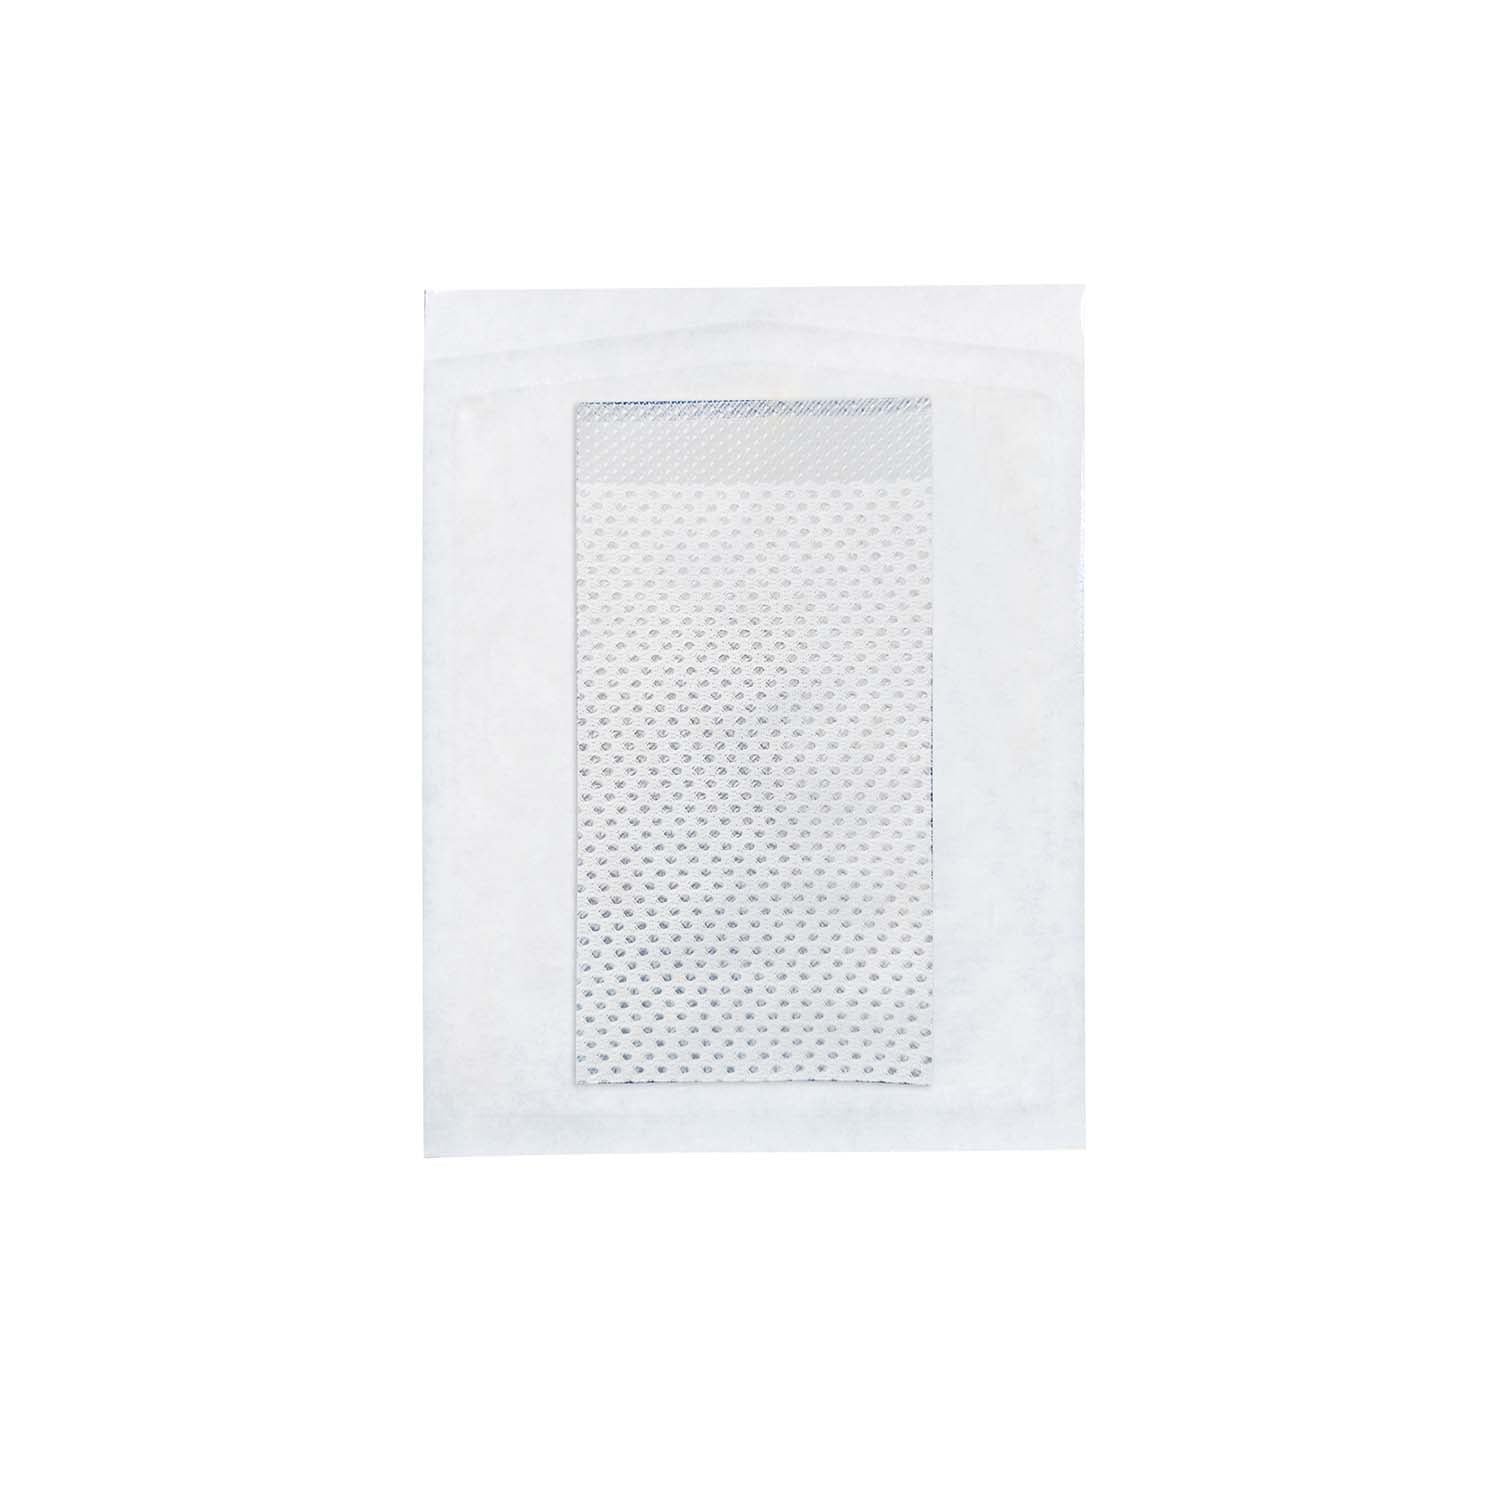 FarlaCONTACT Wound Contact Layer Silicone Dressing | Two Sided | 20 x 30cm | Pack of 5 | Short Expiry Date (3)